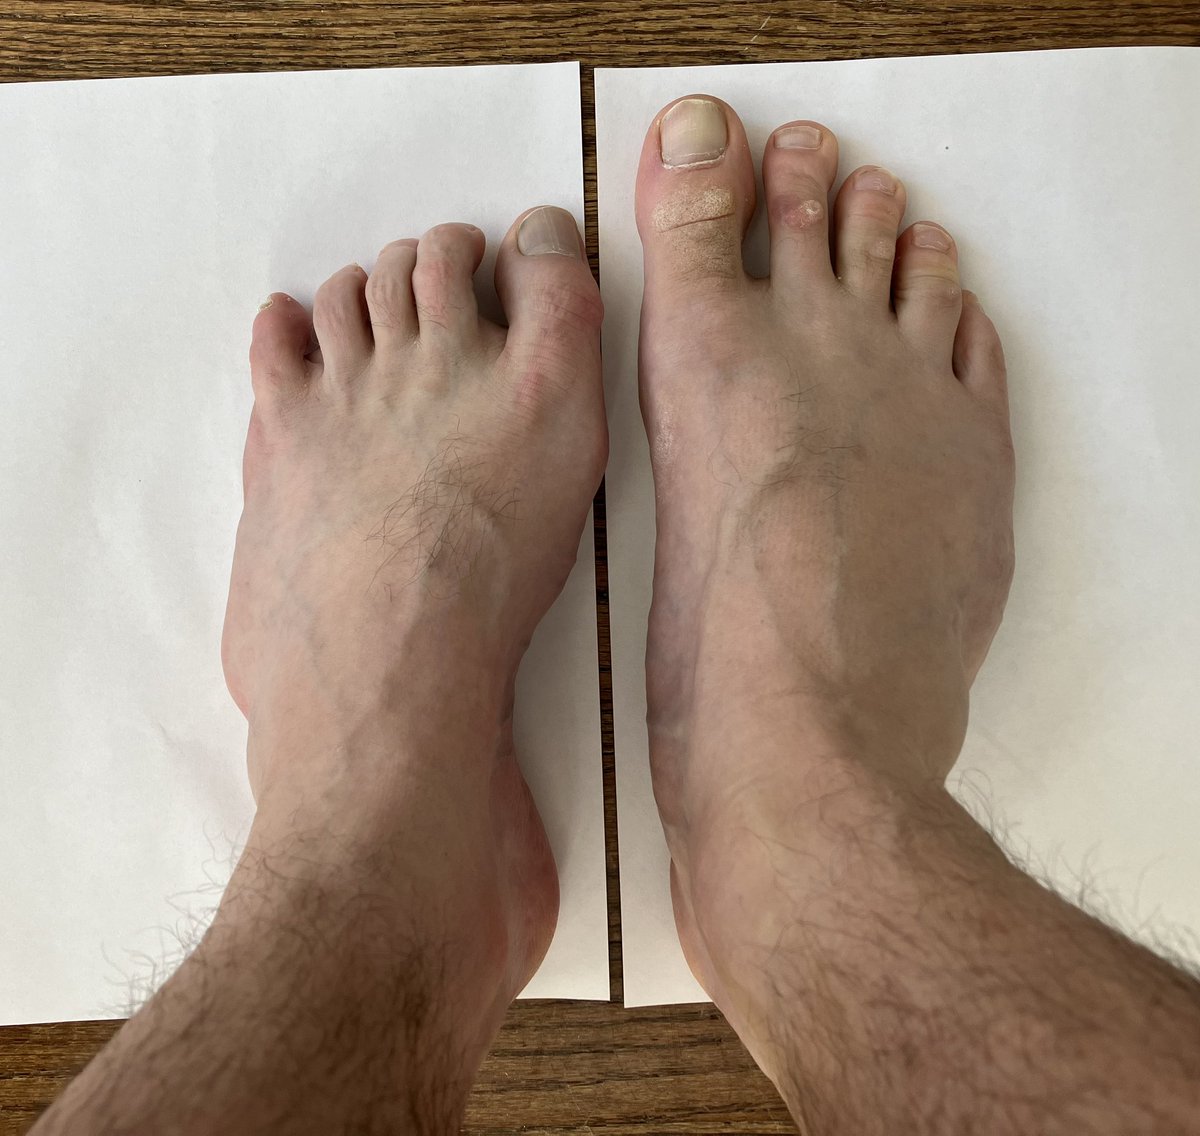 I have a little foot. It causes me lots of pain, and for the last week it’s been injured. I needed an X-Ray, so I called the Xray Department at the hospital in my town, to see if the X-Ray tech would mind wearing a mask for the time it took to adjust my foot for the X-Rays.